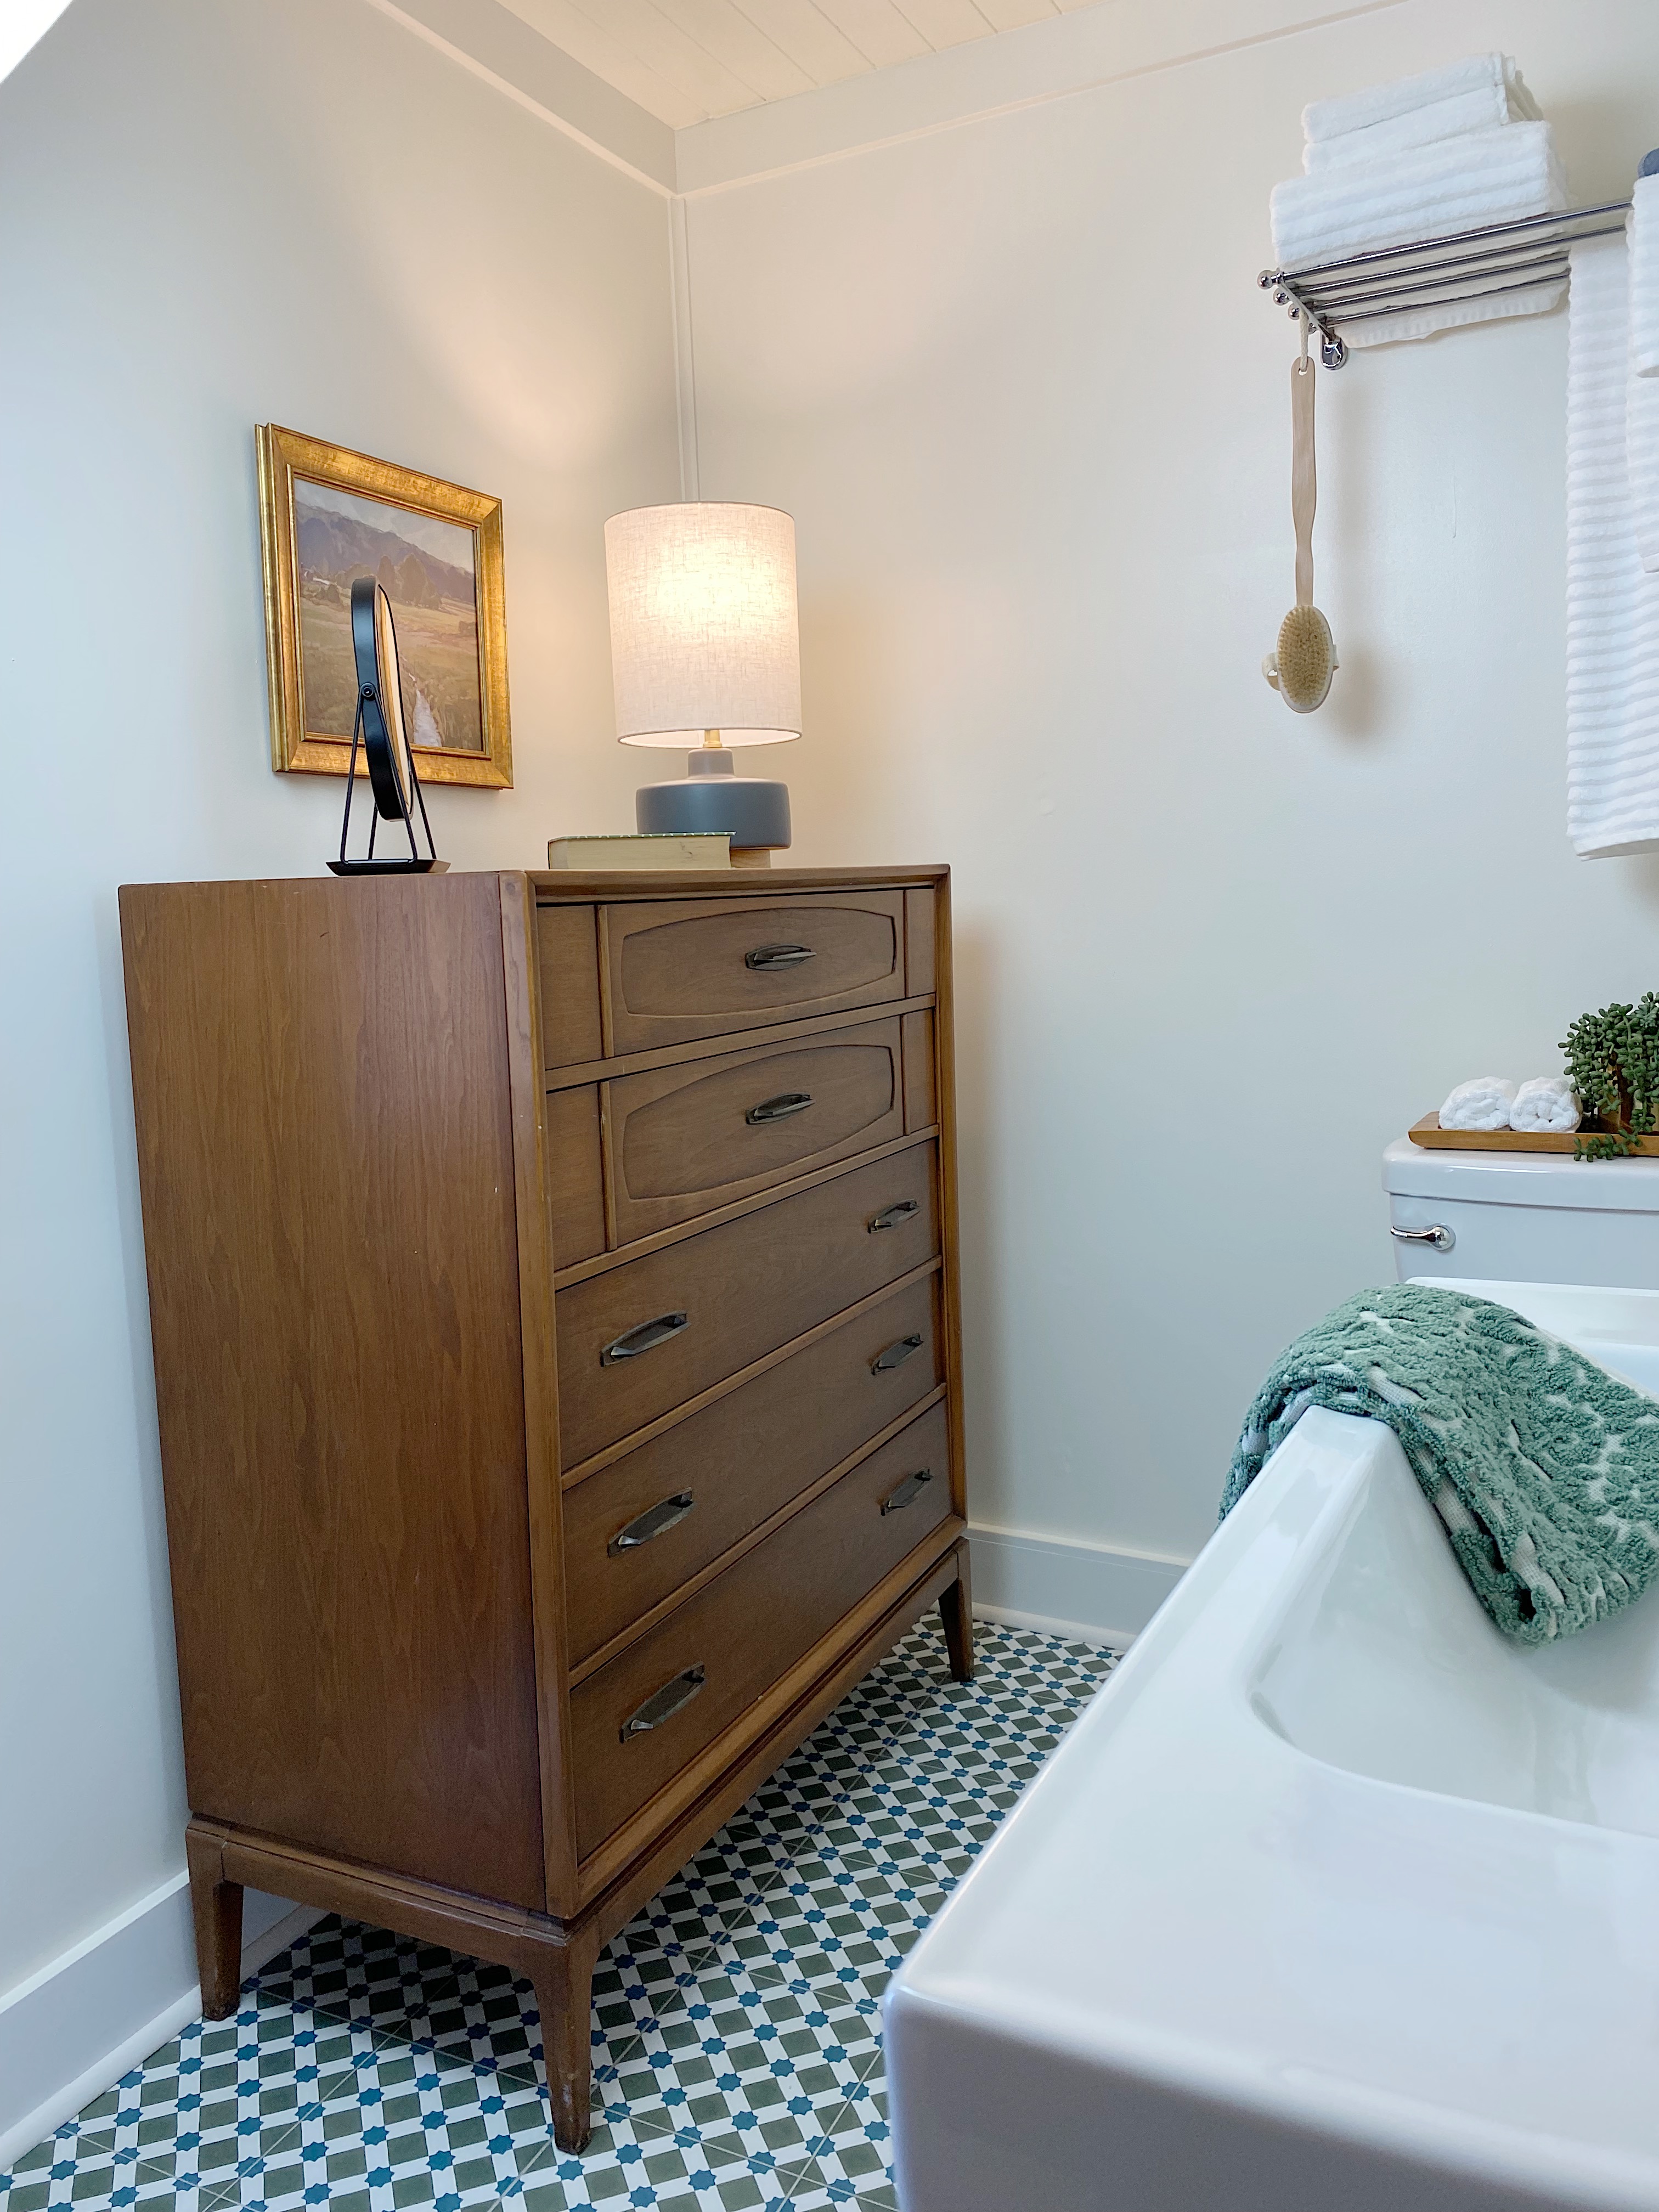 midcentury walnut dresser in bathroom with small lamp and framed art